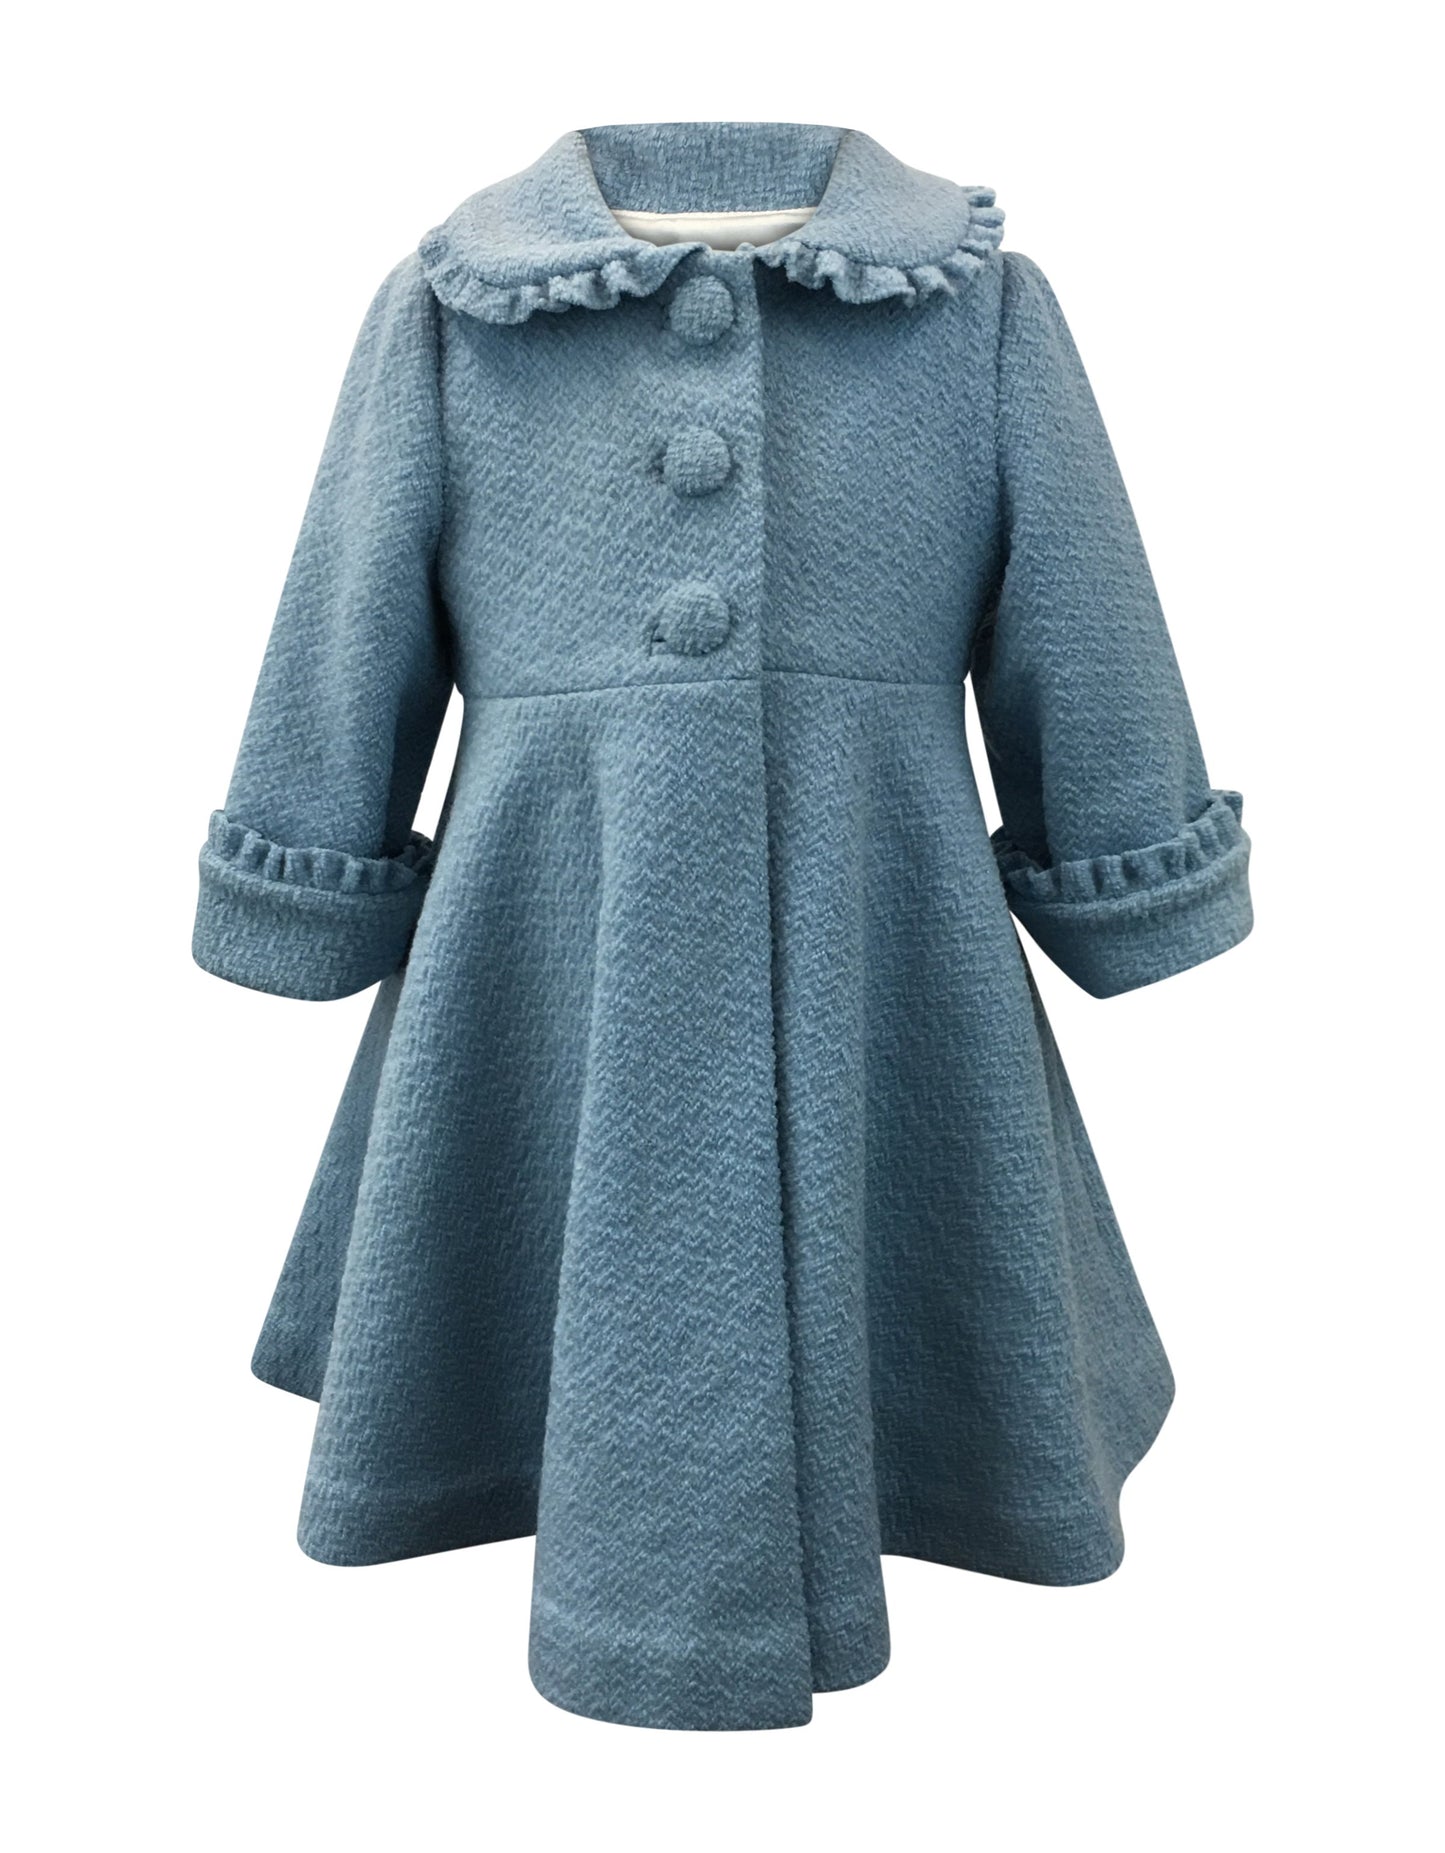 Helena and Harry Girl's Blue Boucle with Ruffles Coat